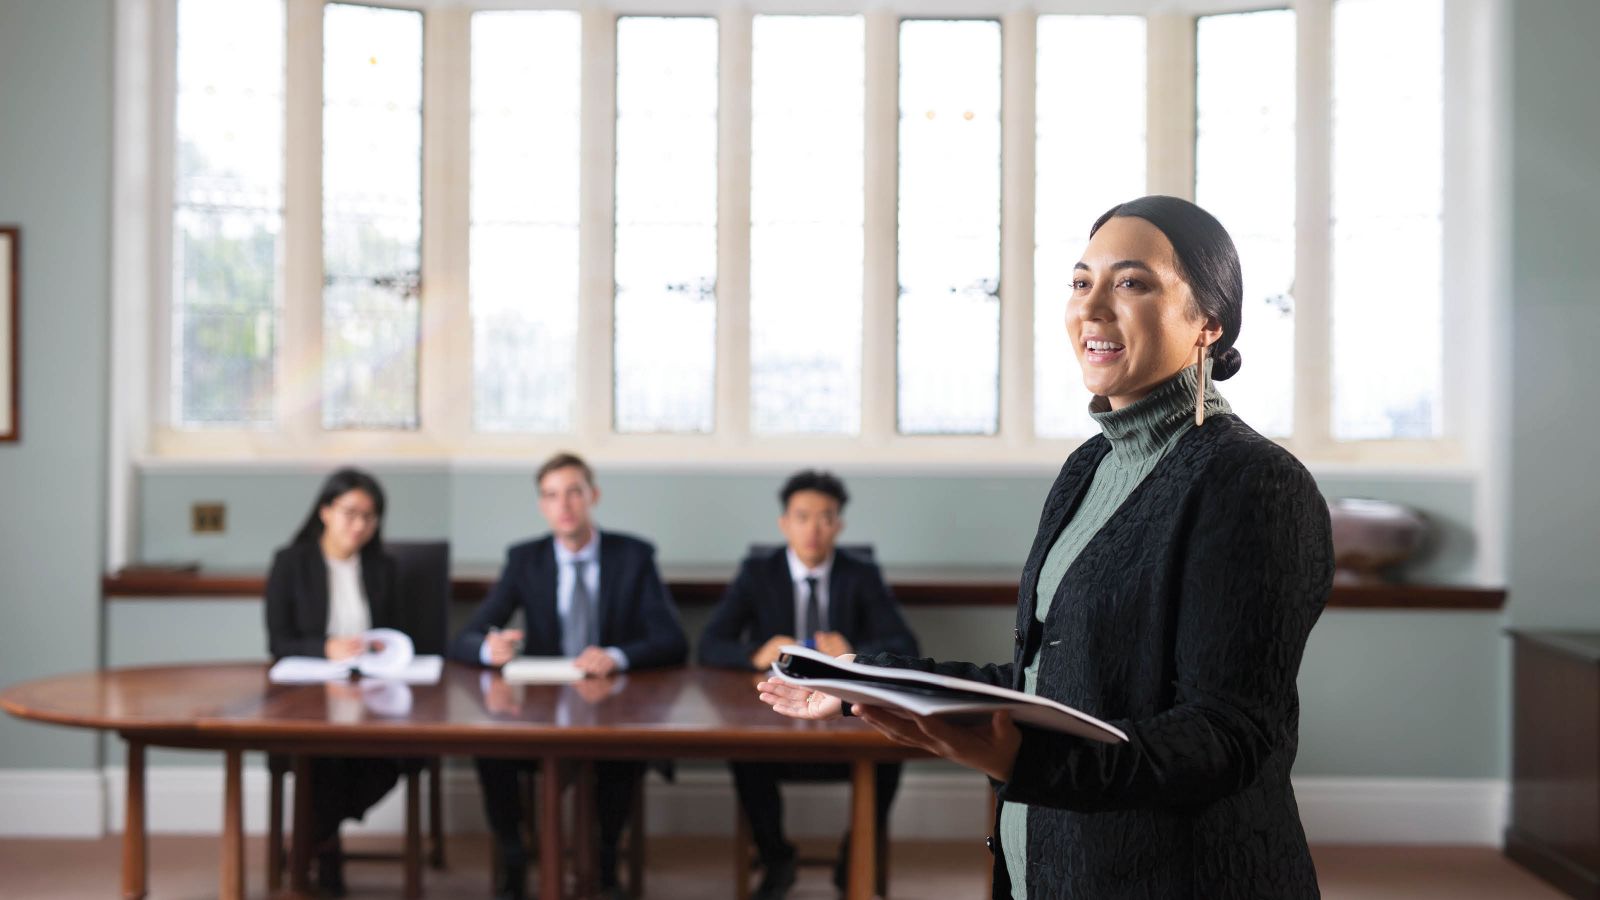 A female undergraduate law student standing, holding a document, and mooting in front of a panel of three judges who are seated at a table.